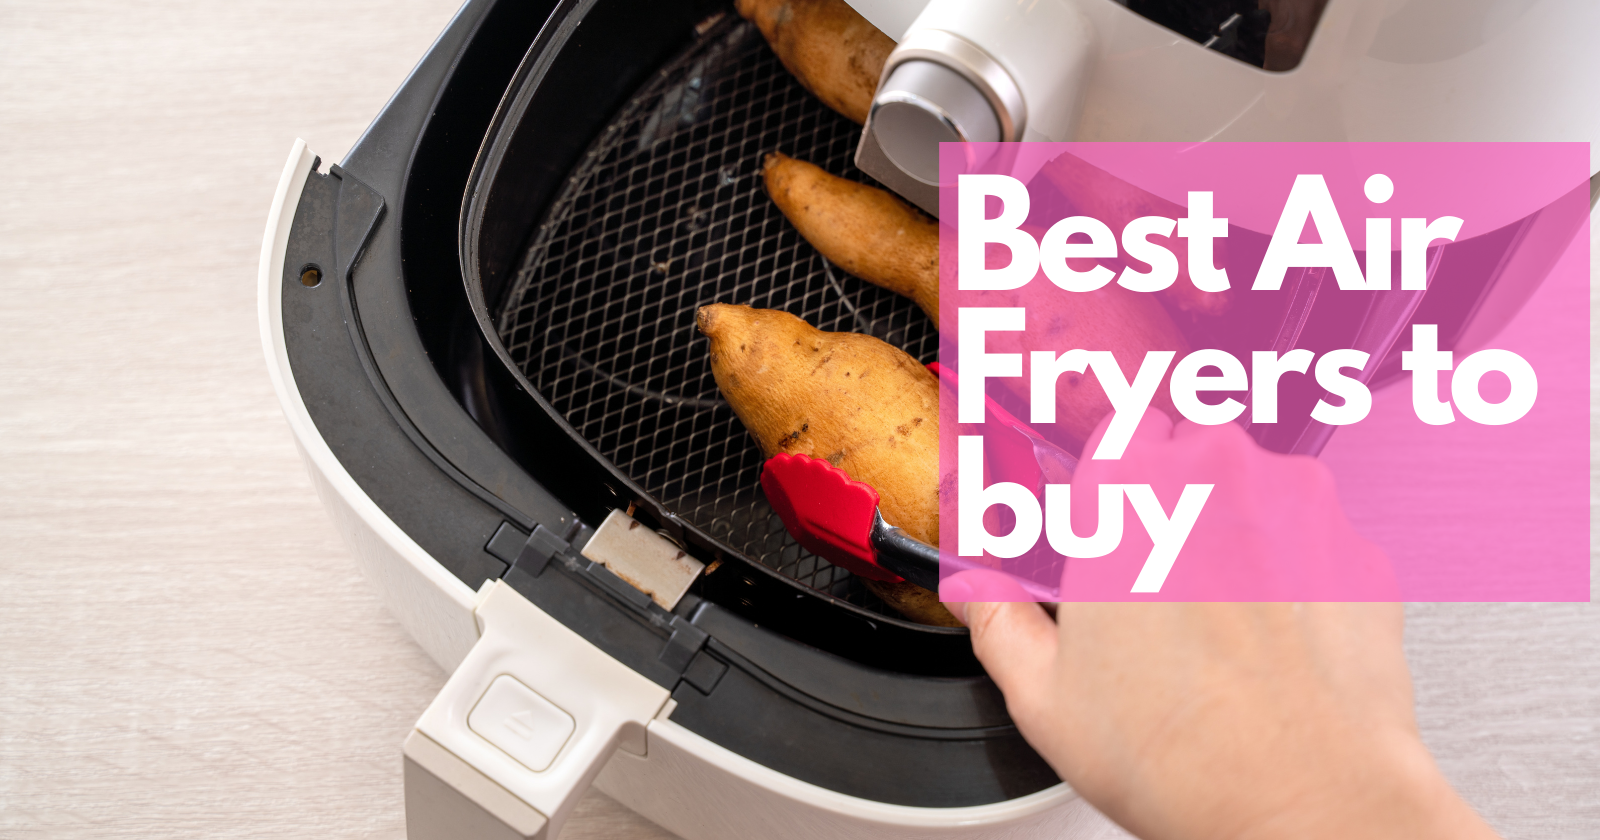 Best Air fryers to buy from Walmart